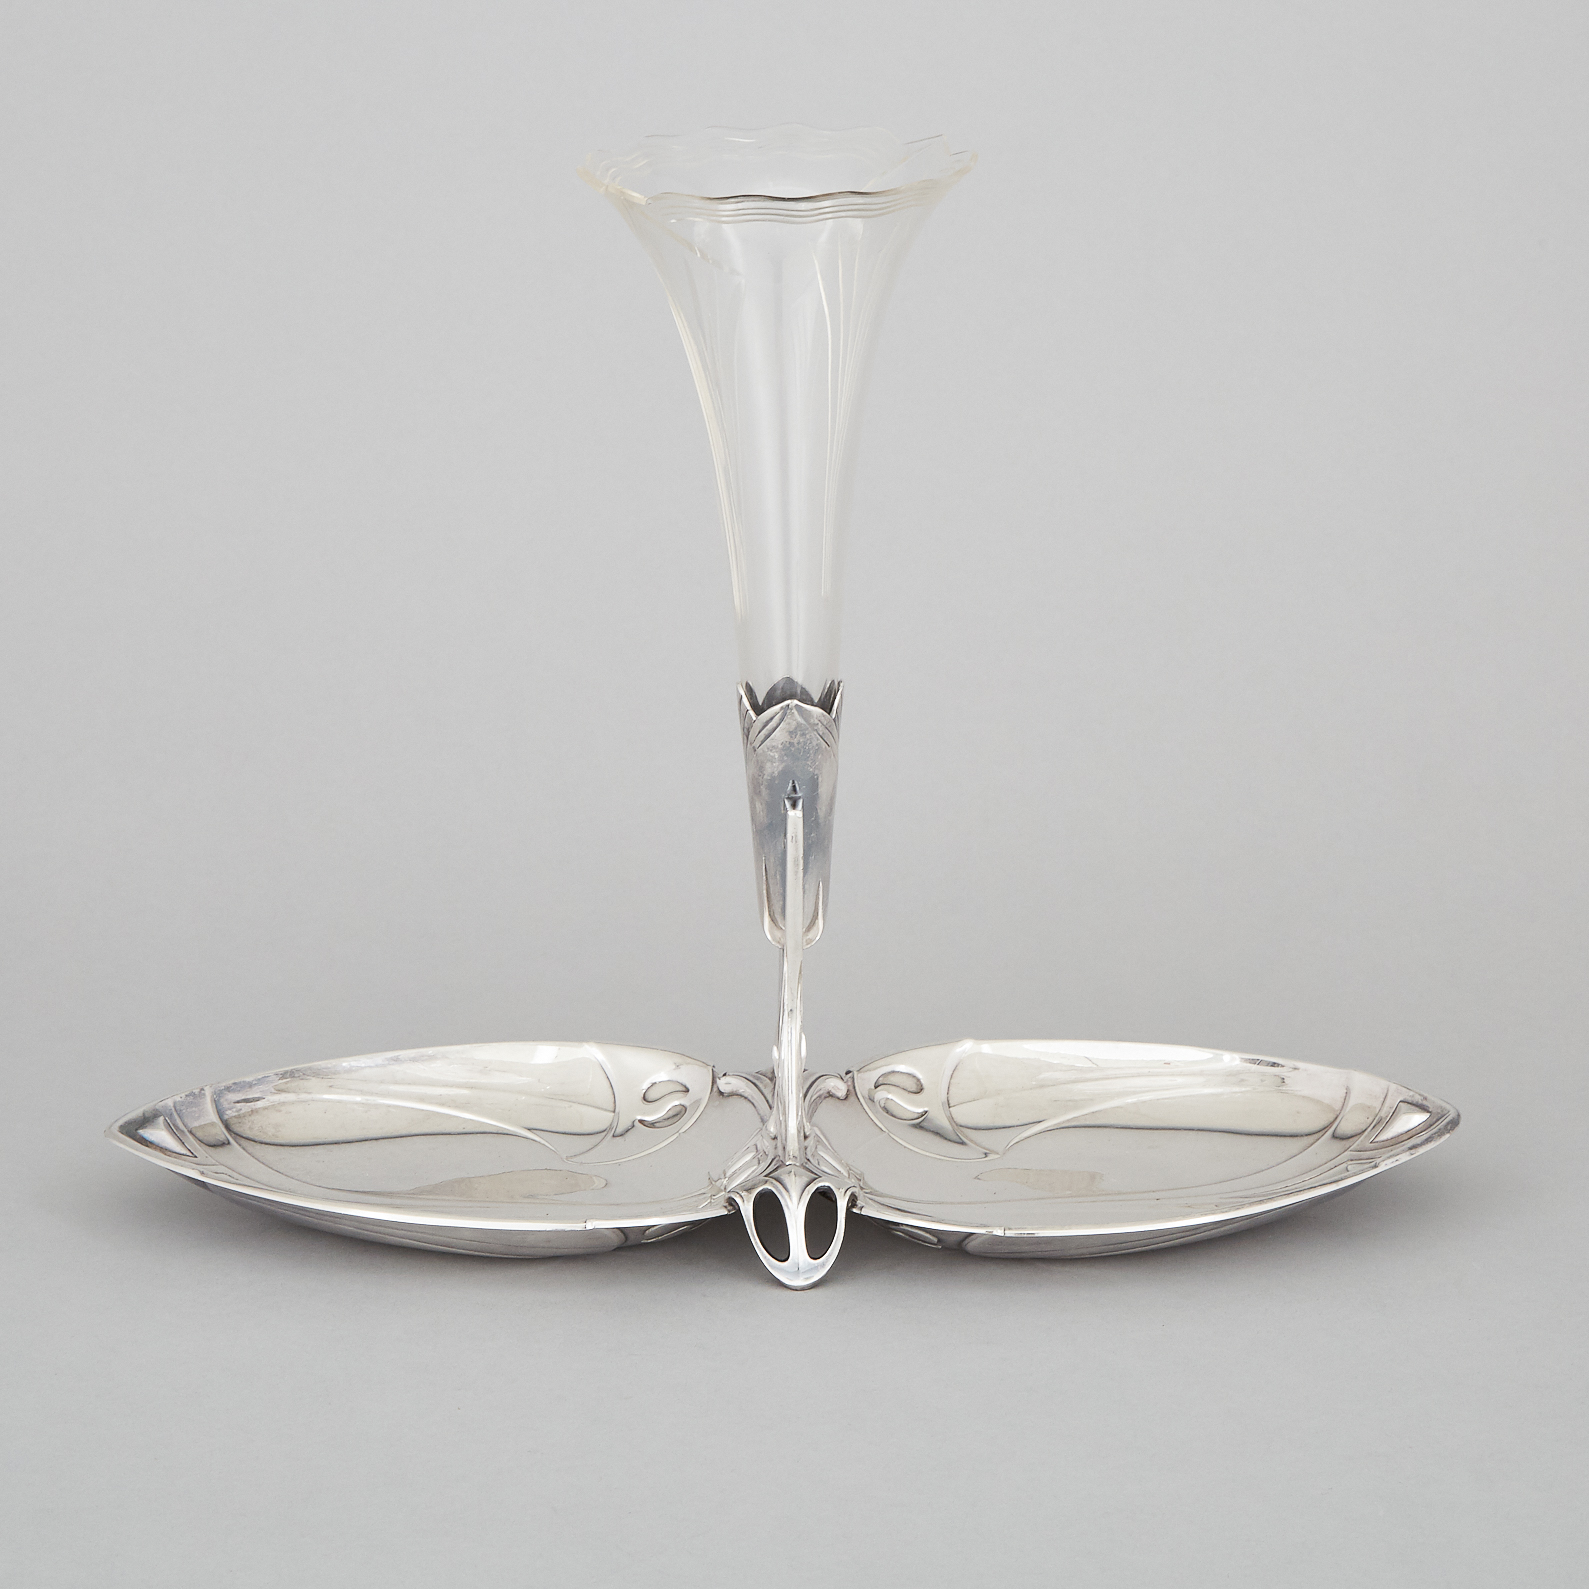 German WMF Silver Plated and Cut Glass Epergne, early 20th century